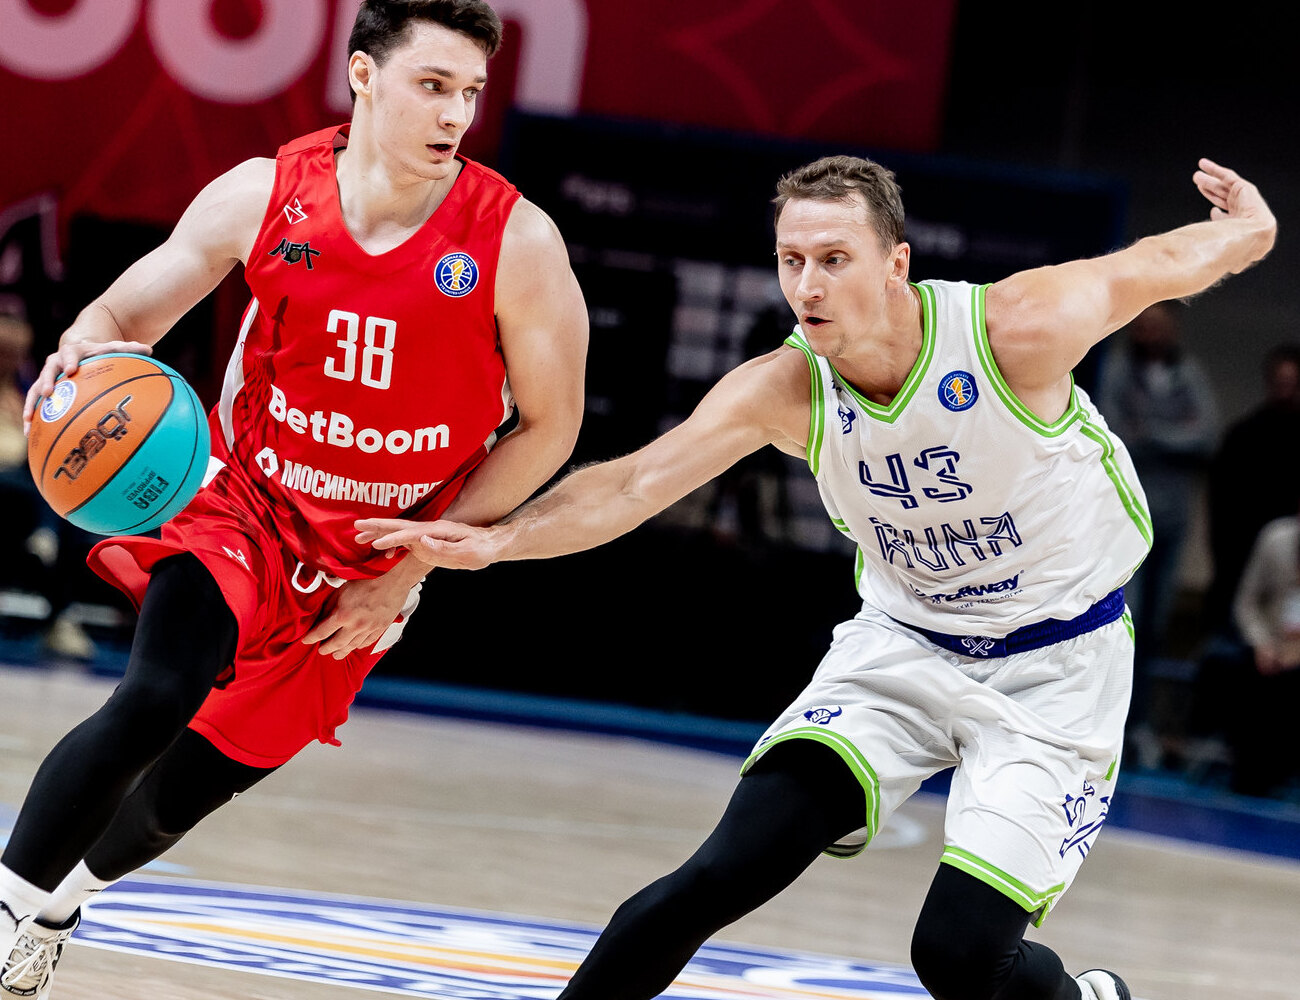 Runa made a 16-point comeback, but MBA got the win in Moscow Derby